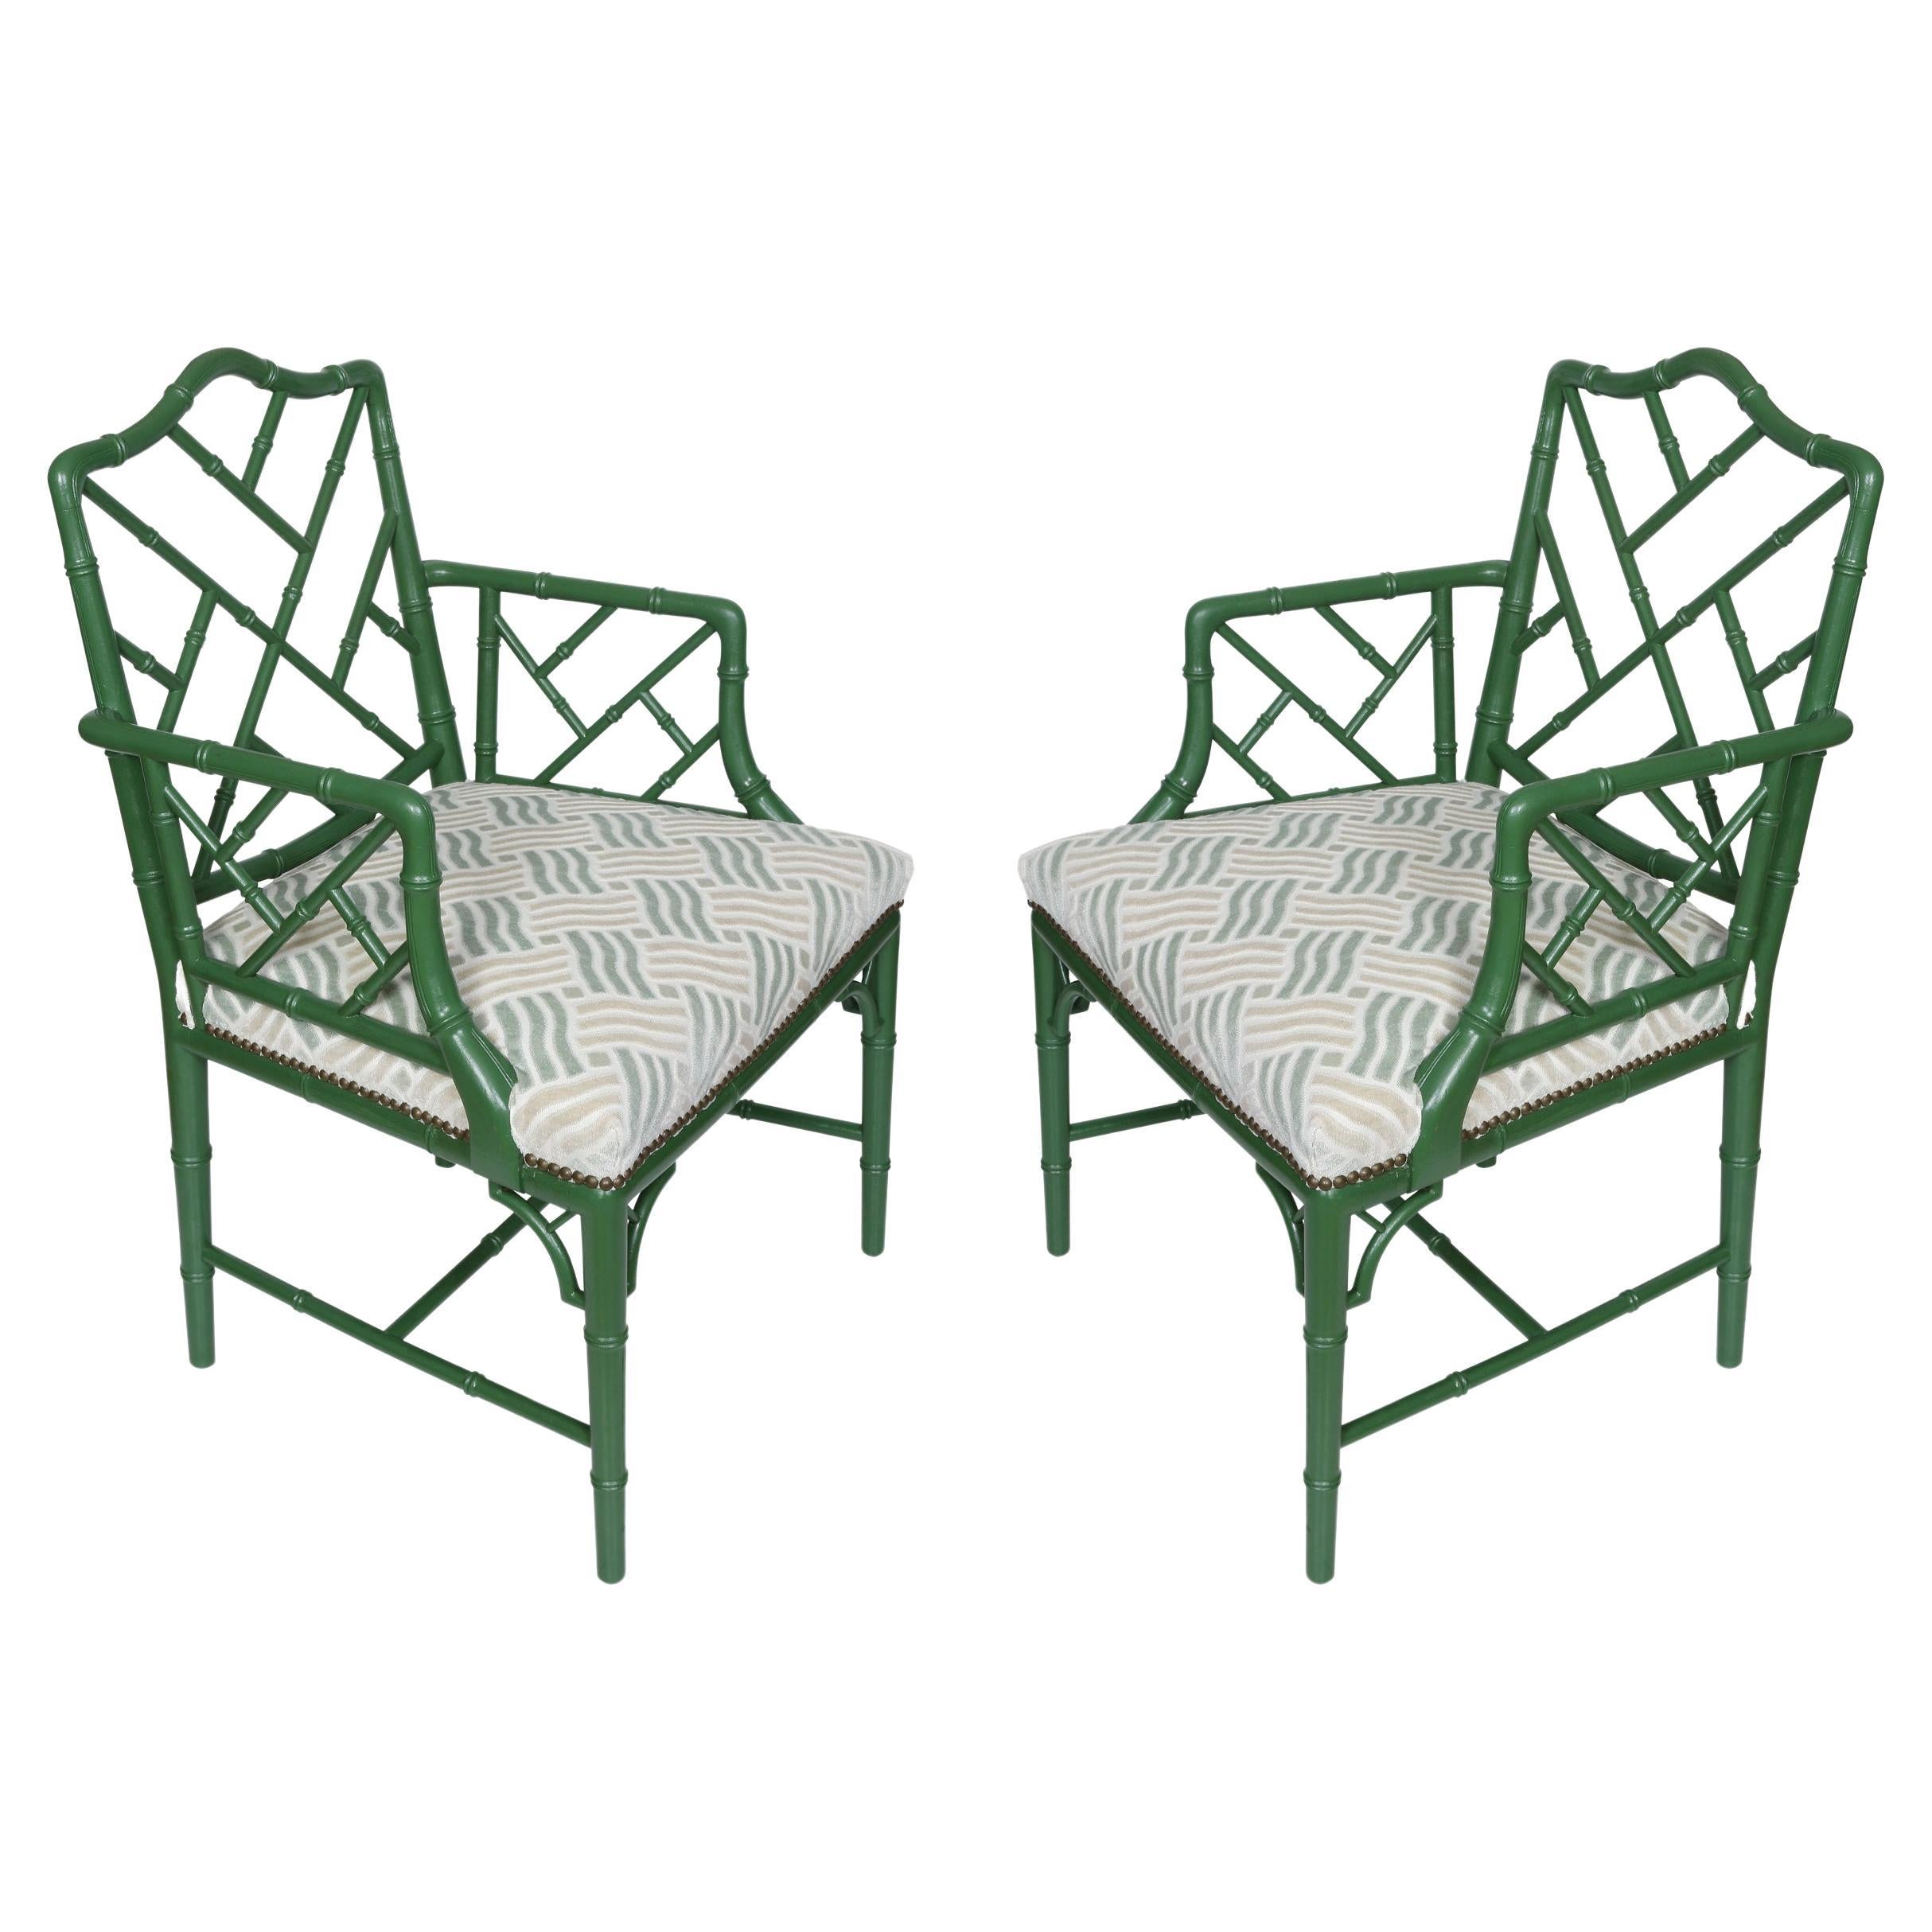 Pair of Green Bamboo Style Arm Chairs With Cut Velvet Seat Cushions For Sale